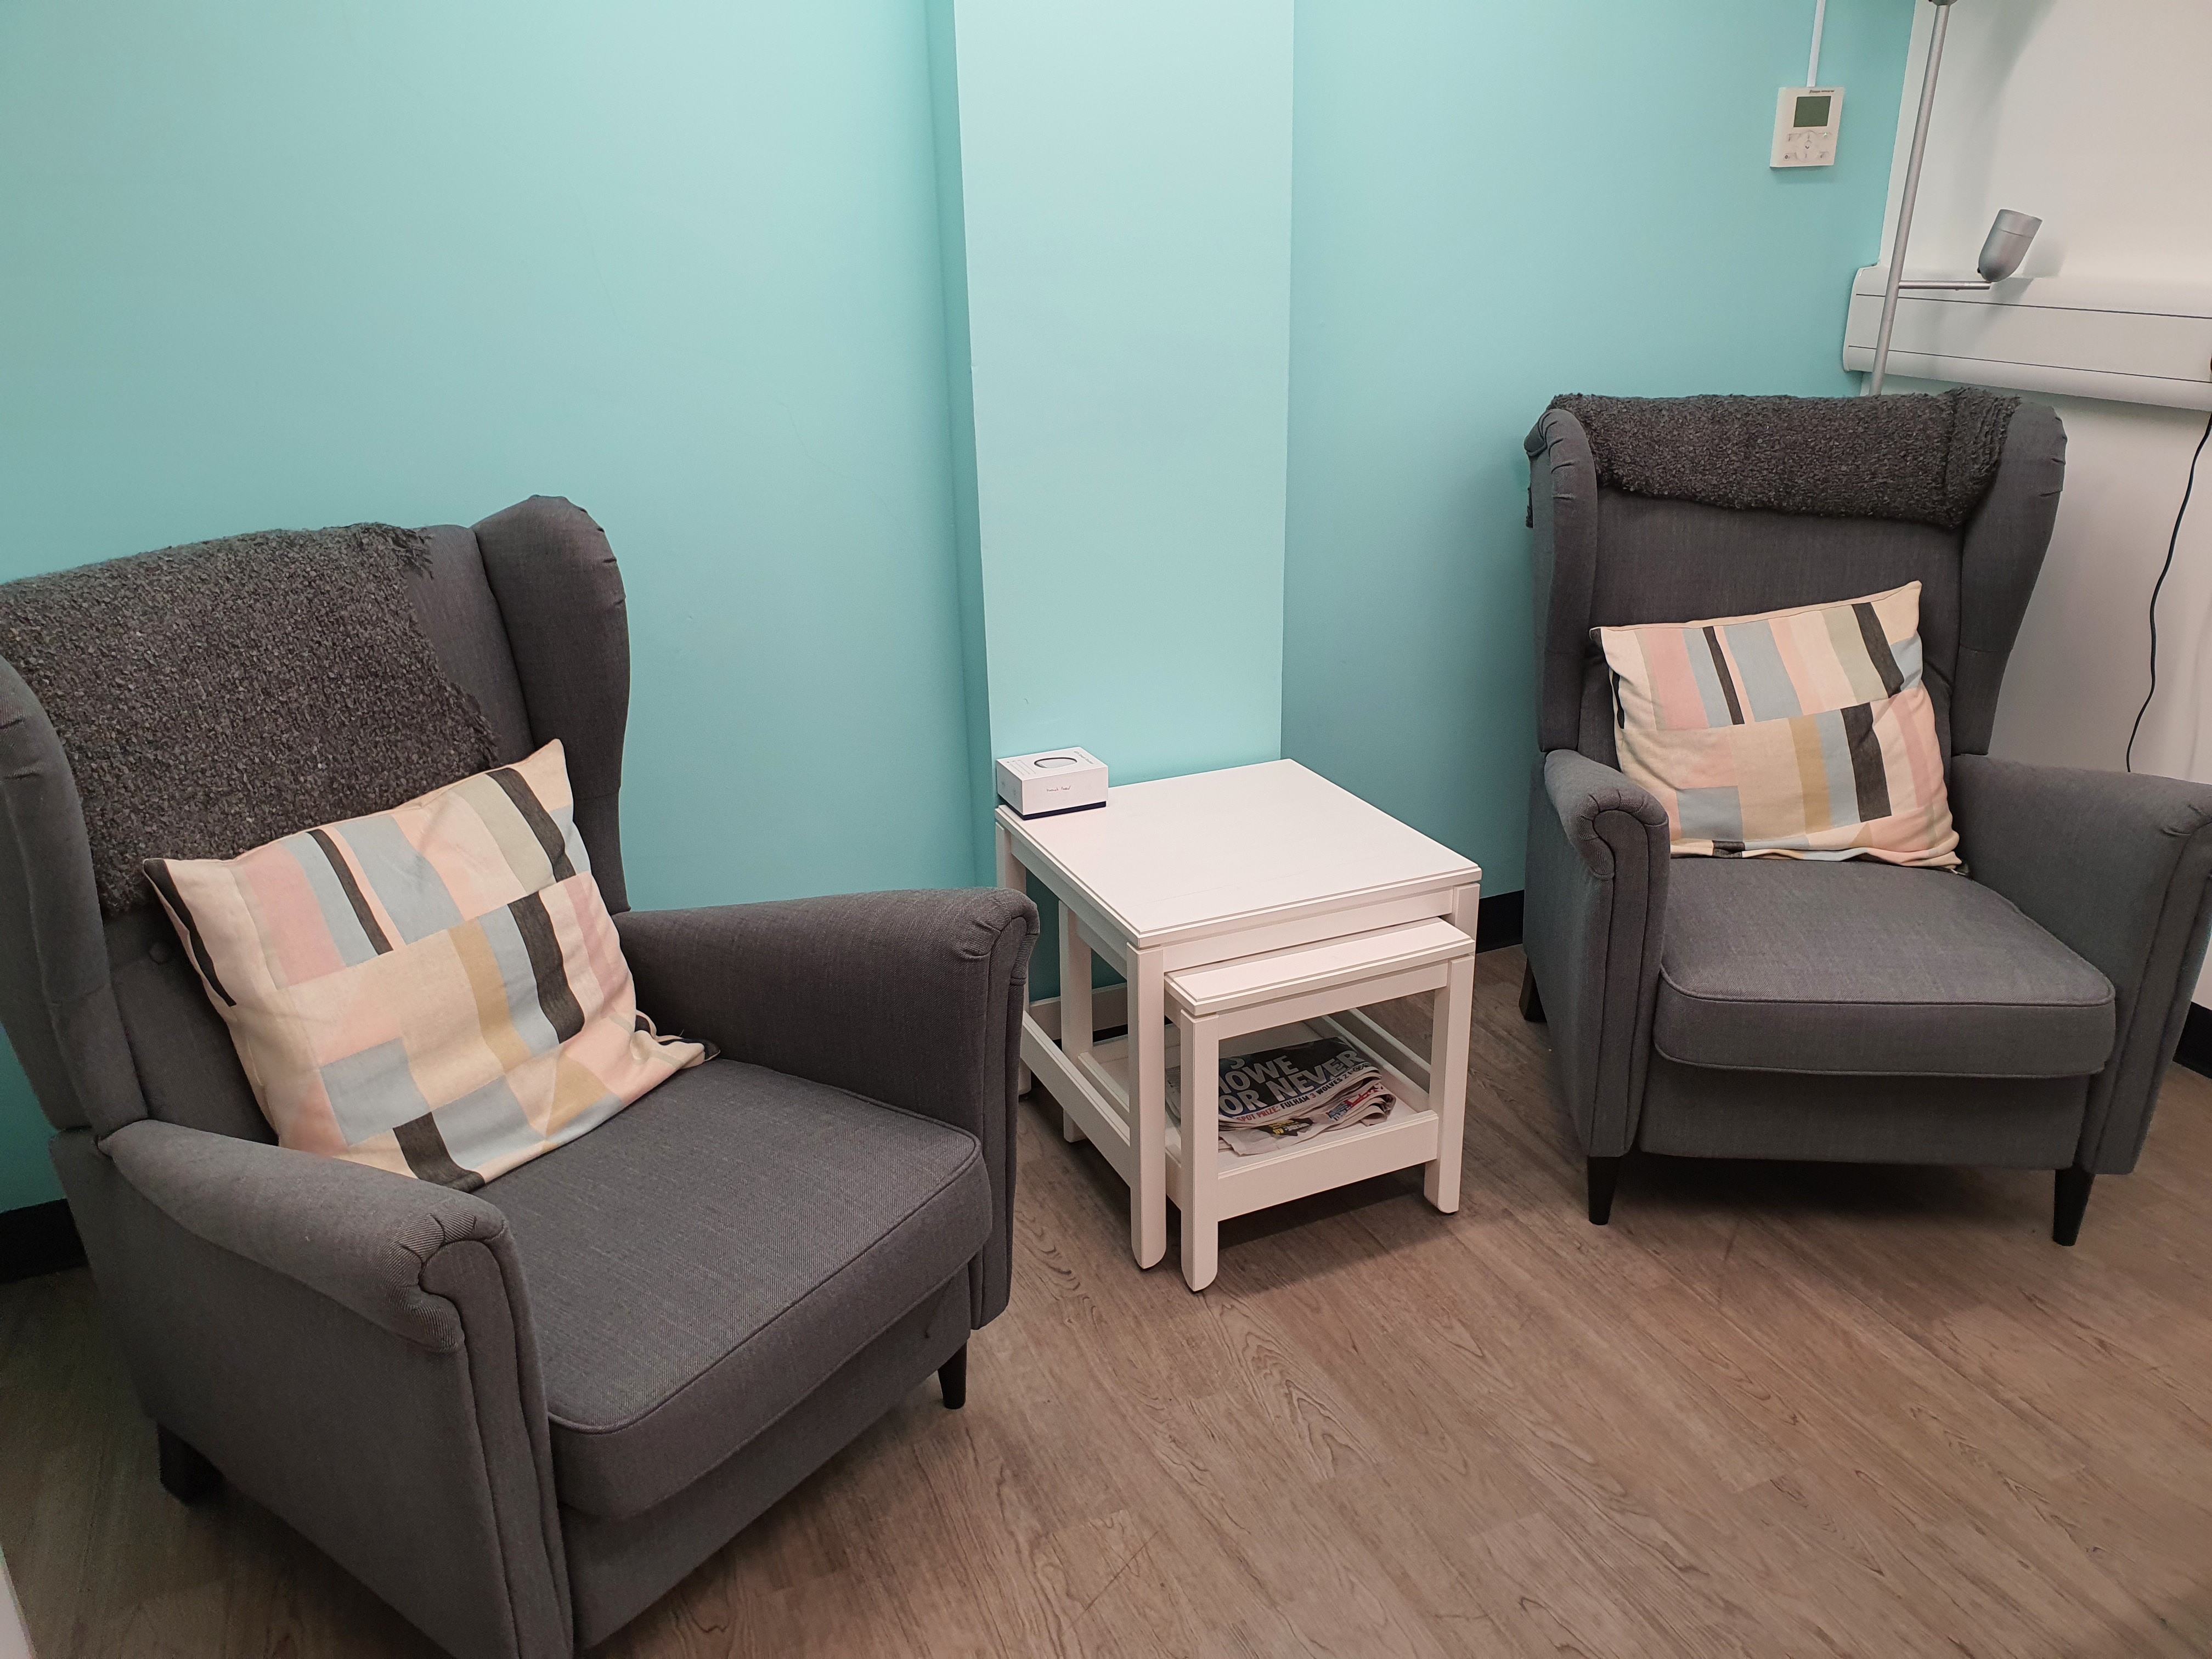 Inside one of the spaces - two grey arm chairs with a light blue wall